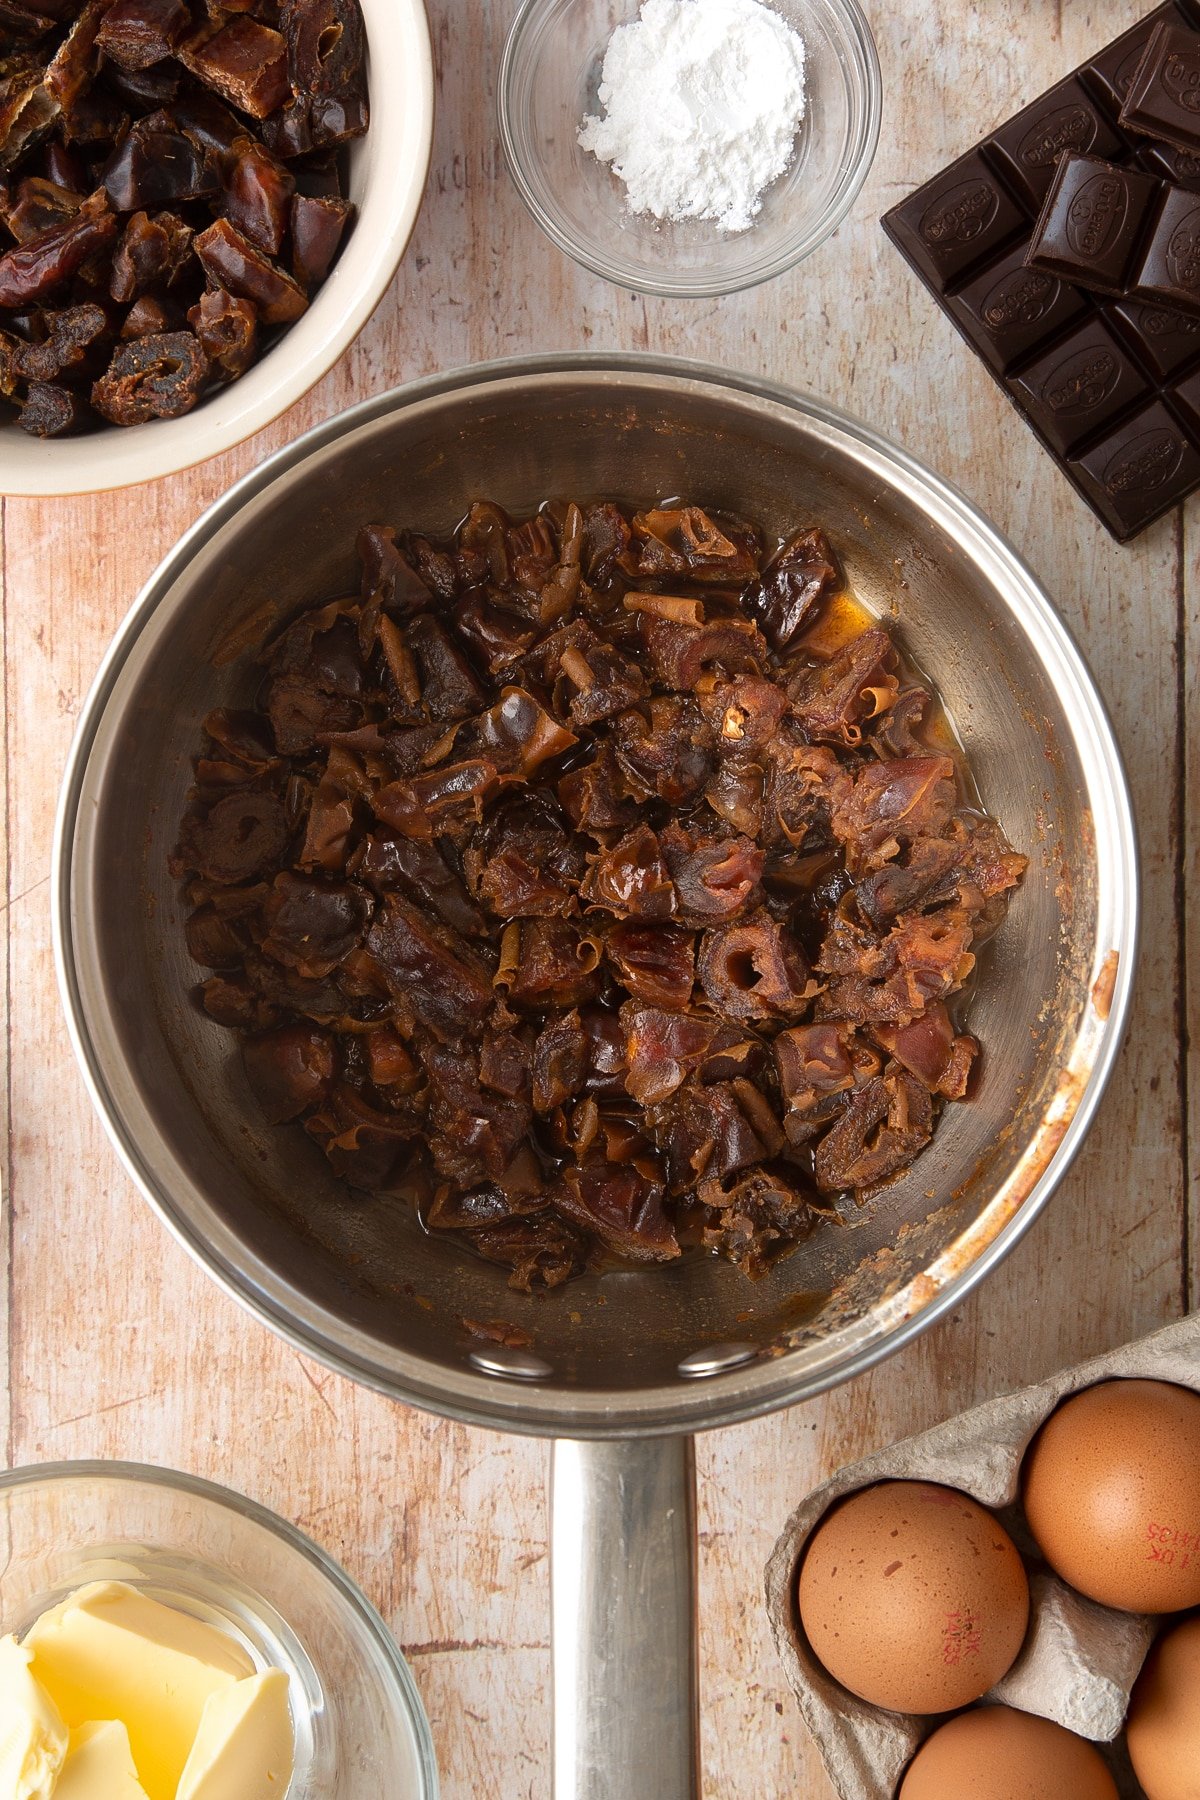 A sauce pan containing chopped dried dates simmered in water. Ingredients to make whole grain brownies surround the pan.